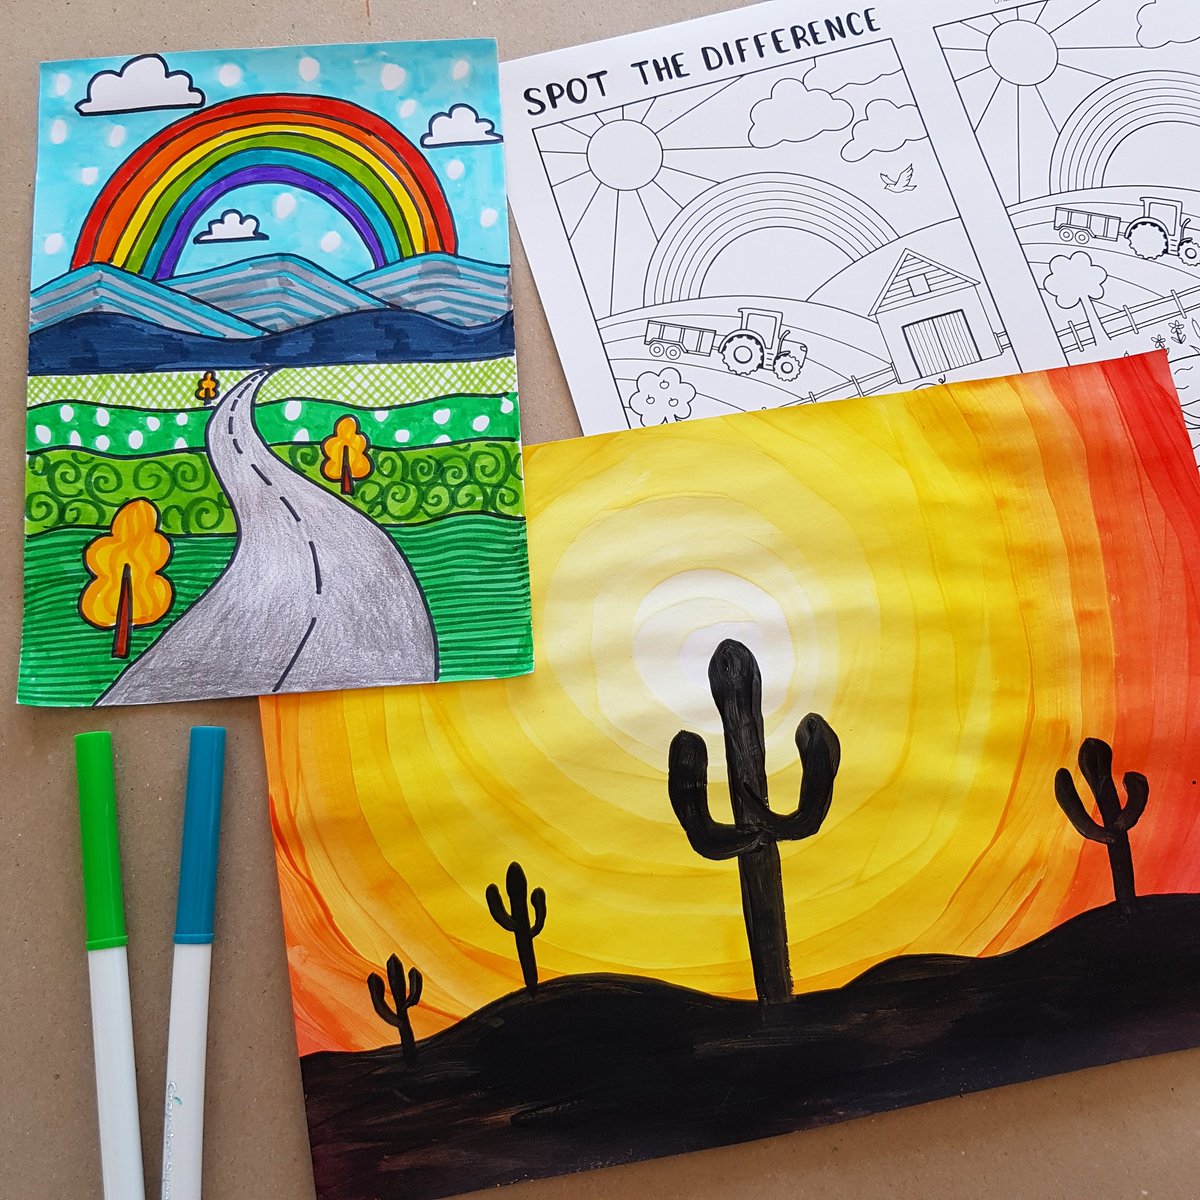 Our 'Creative Kids Membership' activities have a landscape theme this week. We use colour mixing and perspective techniques to create these beautiful pictures, plus there is a fun 'spot the difference' activity sheet!
🏜
#KidsCrafts #CreativeKids #KidsArtsAndCrafts #KidsArt